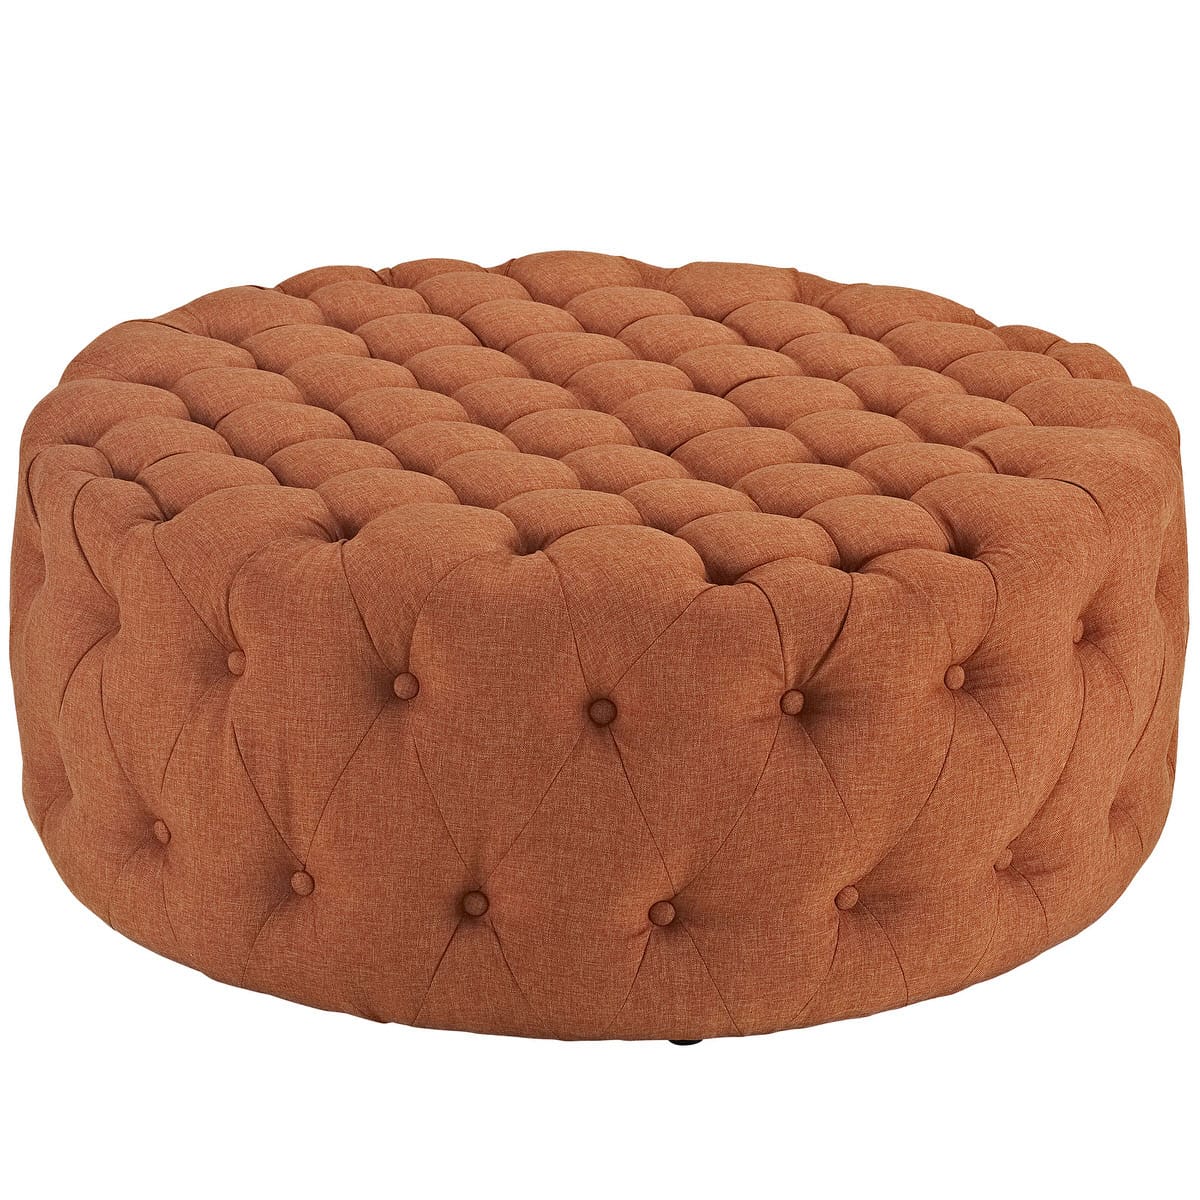 Amour Upholstered Fabric Ottoman Orange by Modern Living